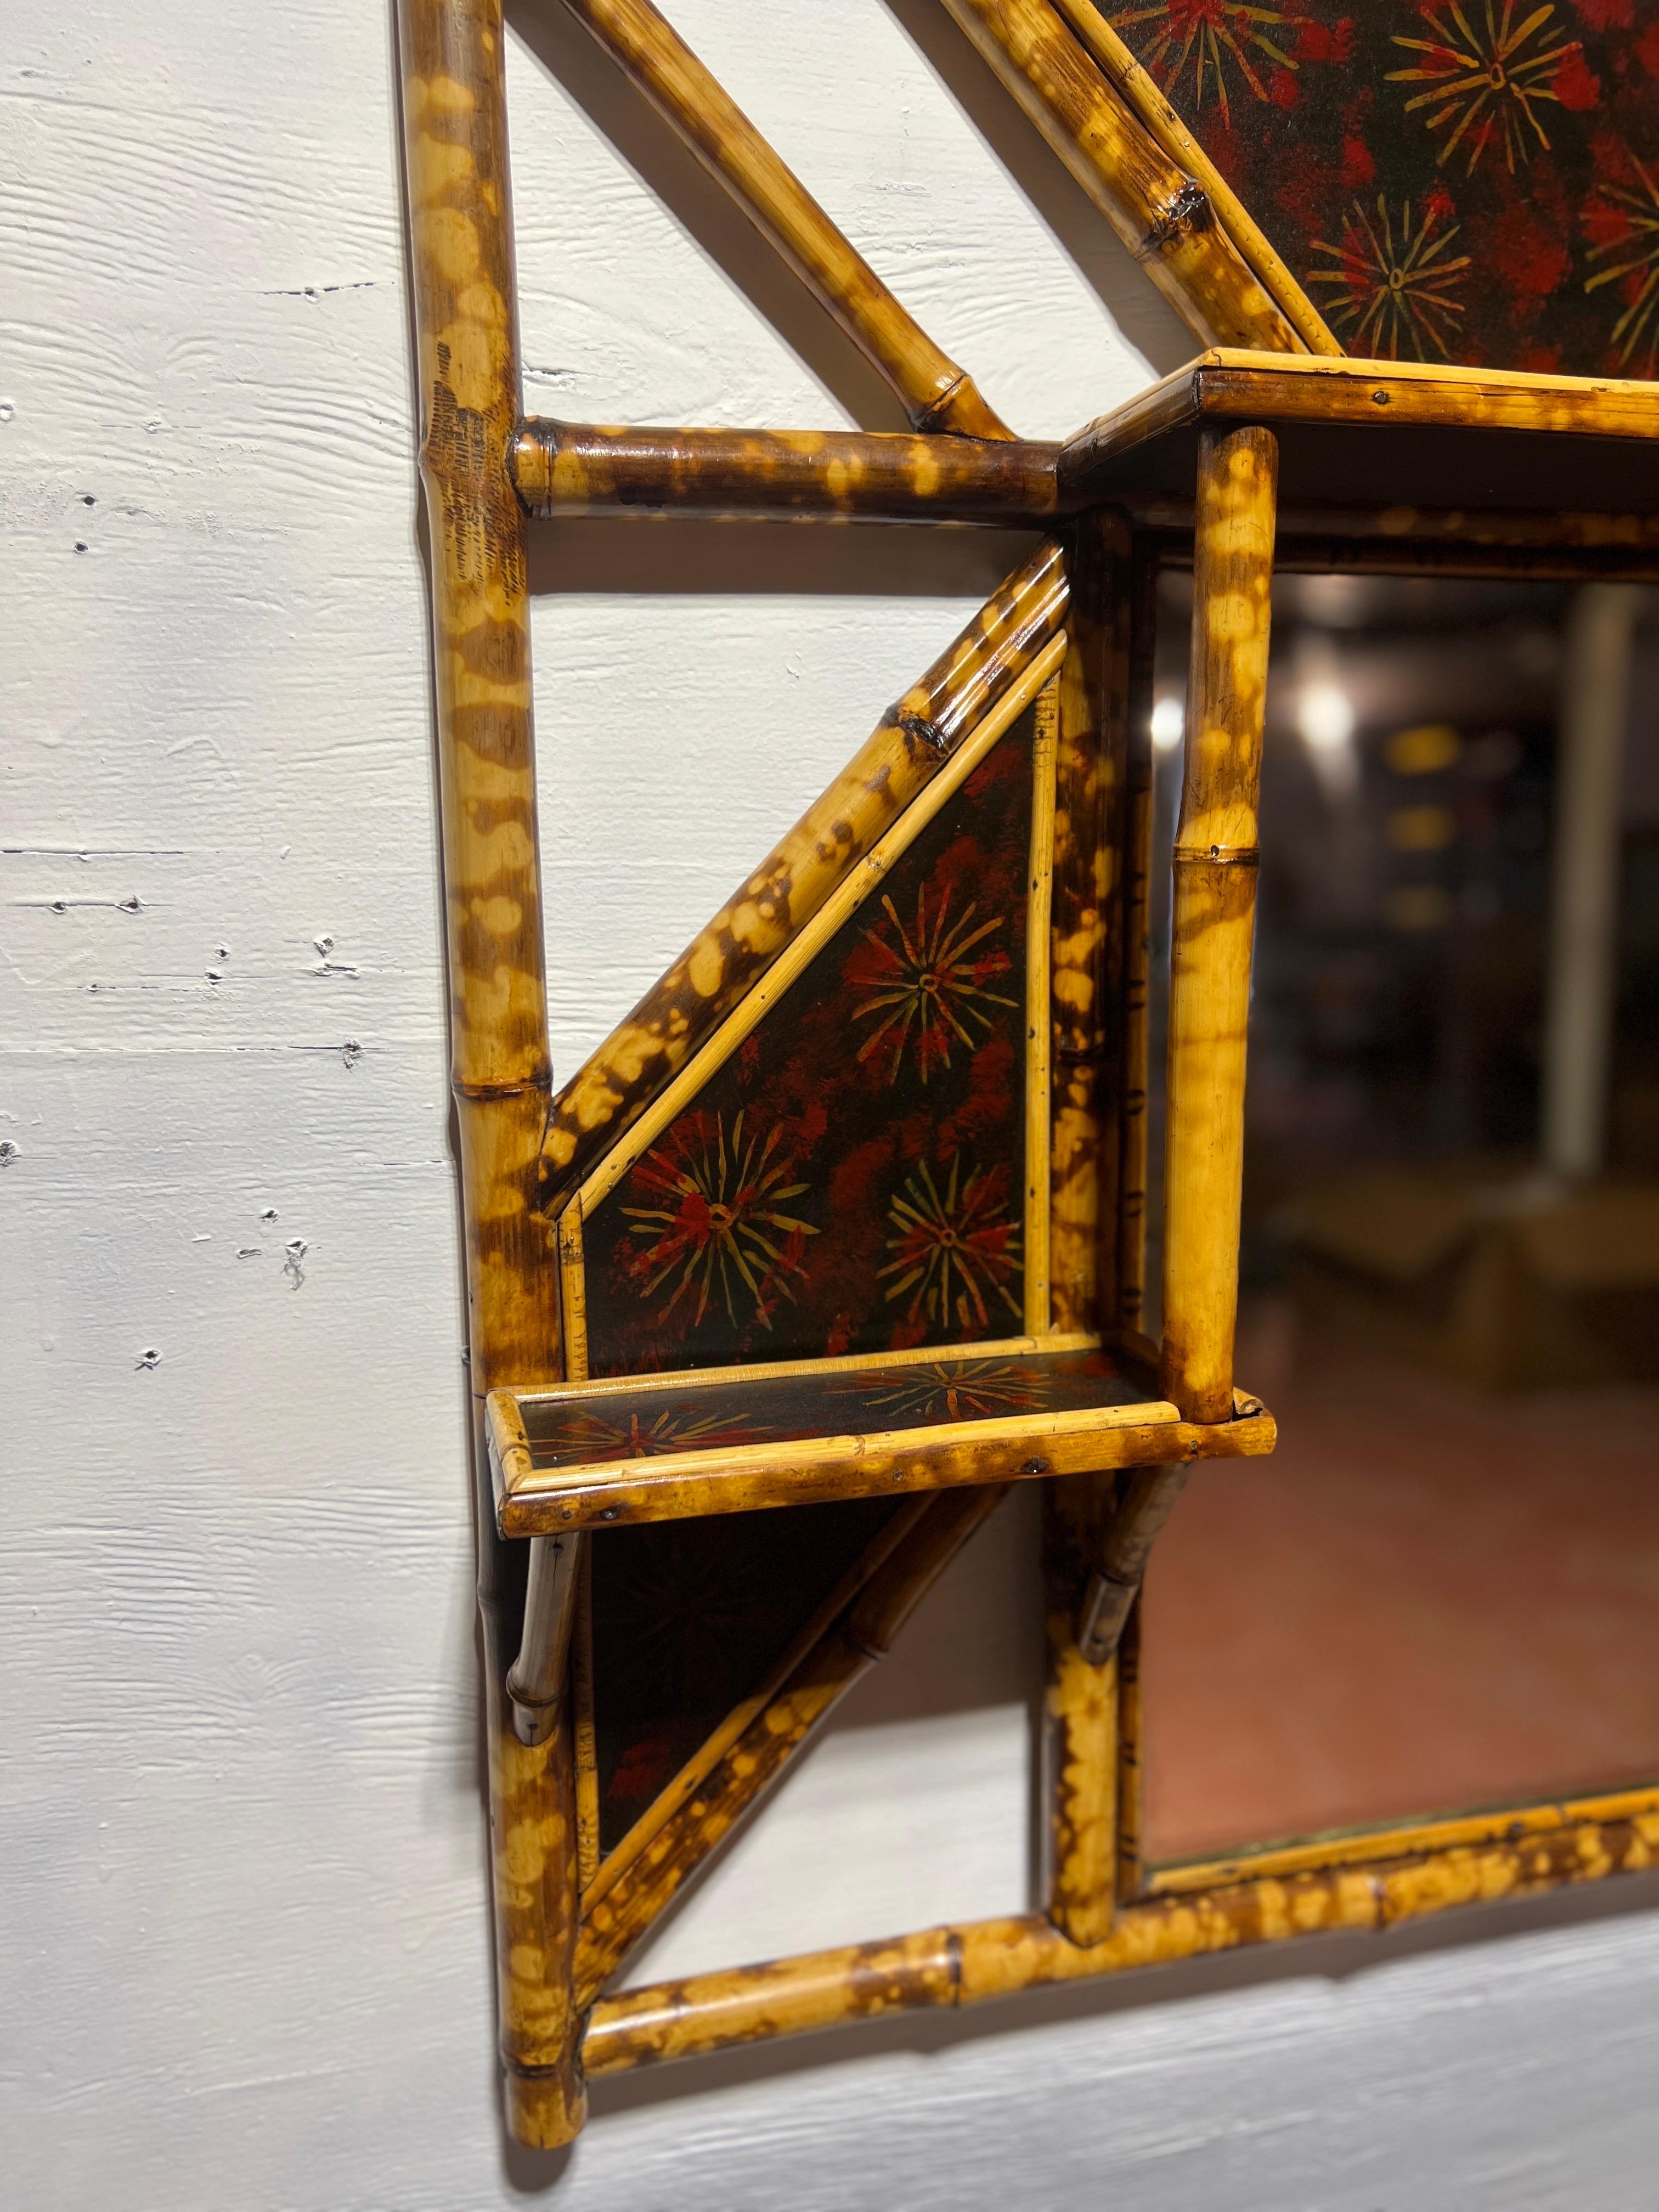 19th Century English Aesthetic Movement Lacquered Bamboo Wall Mirror / Shelf For Sale 5